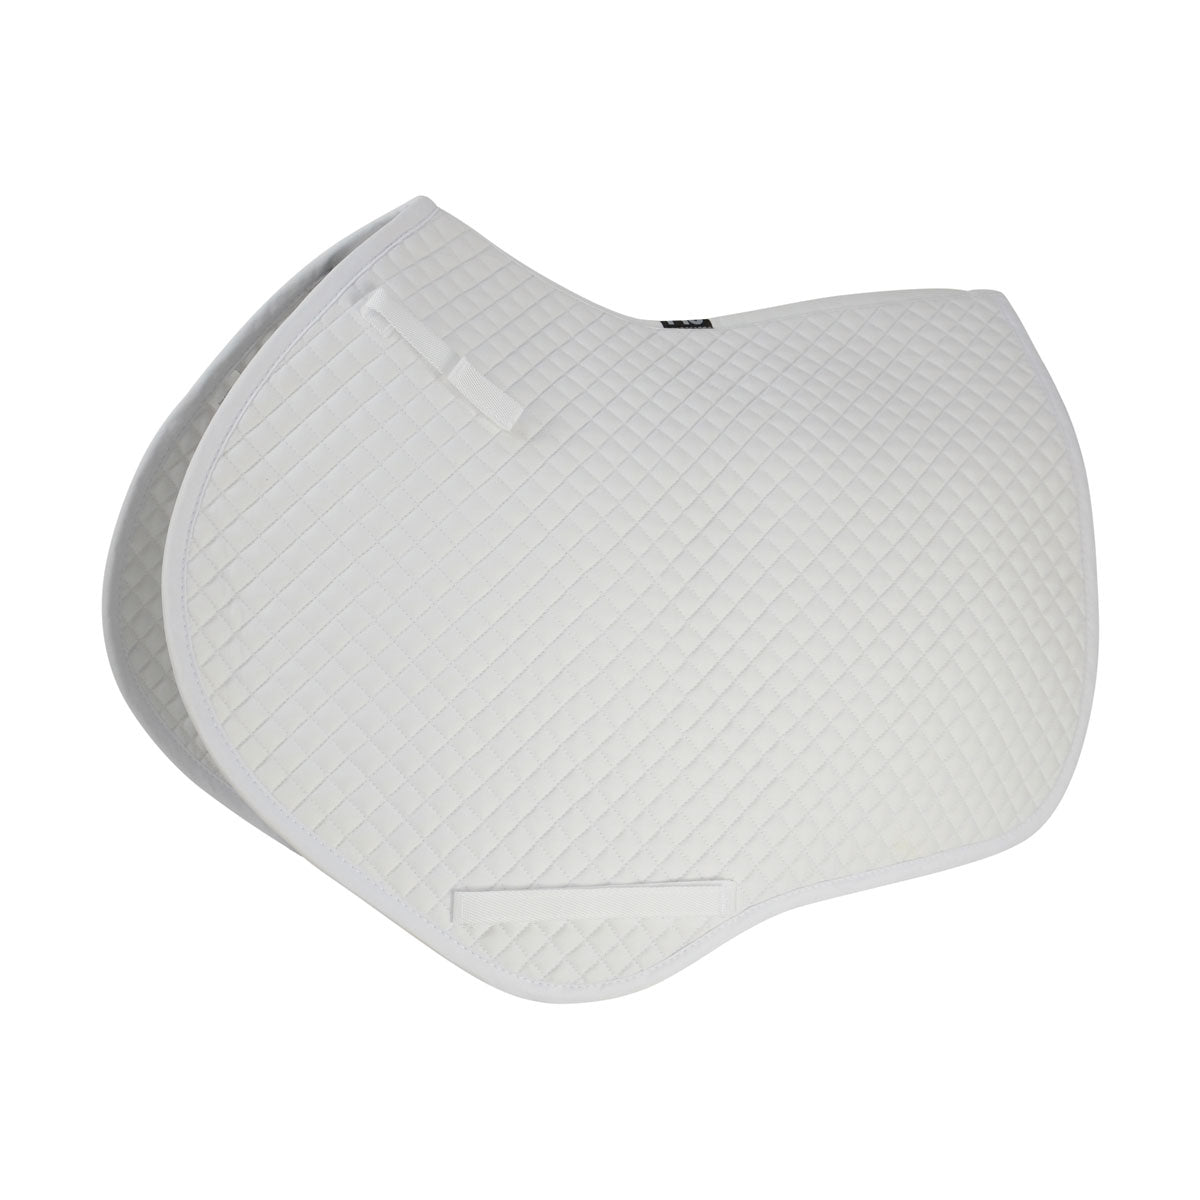 Hywither Competencia Close Contacto Saddle Pad